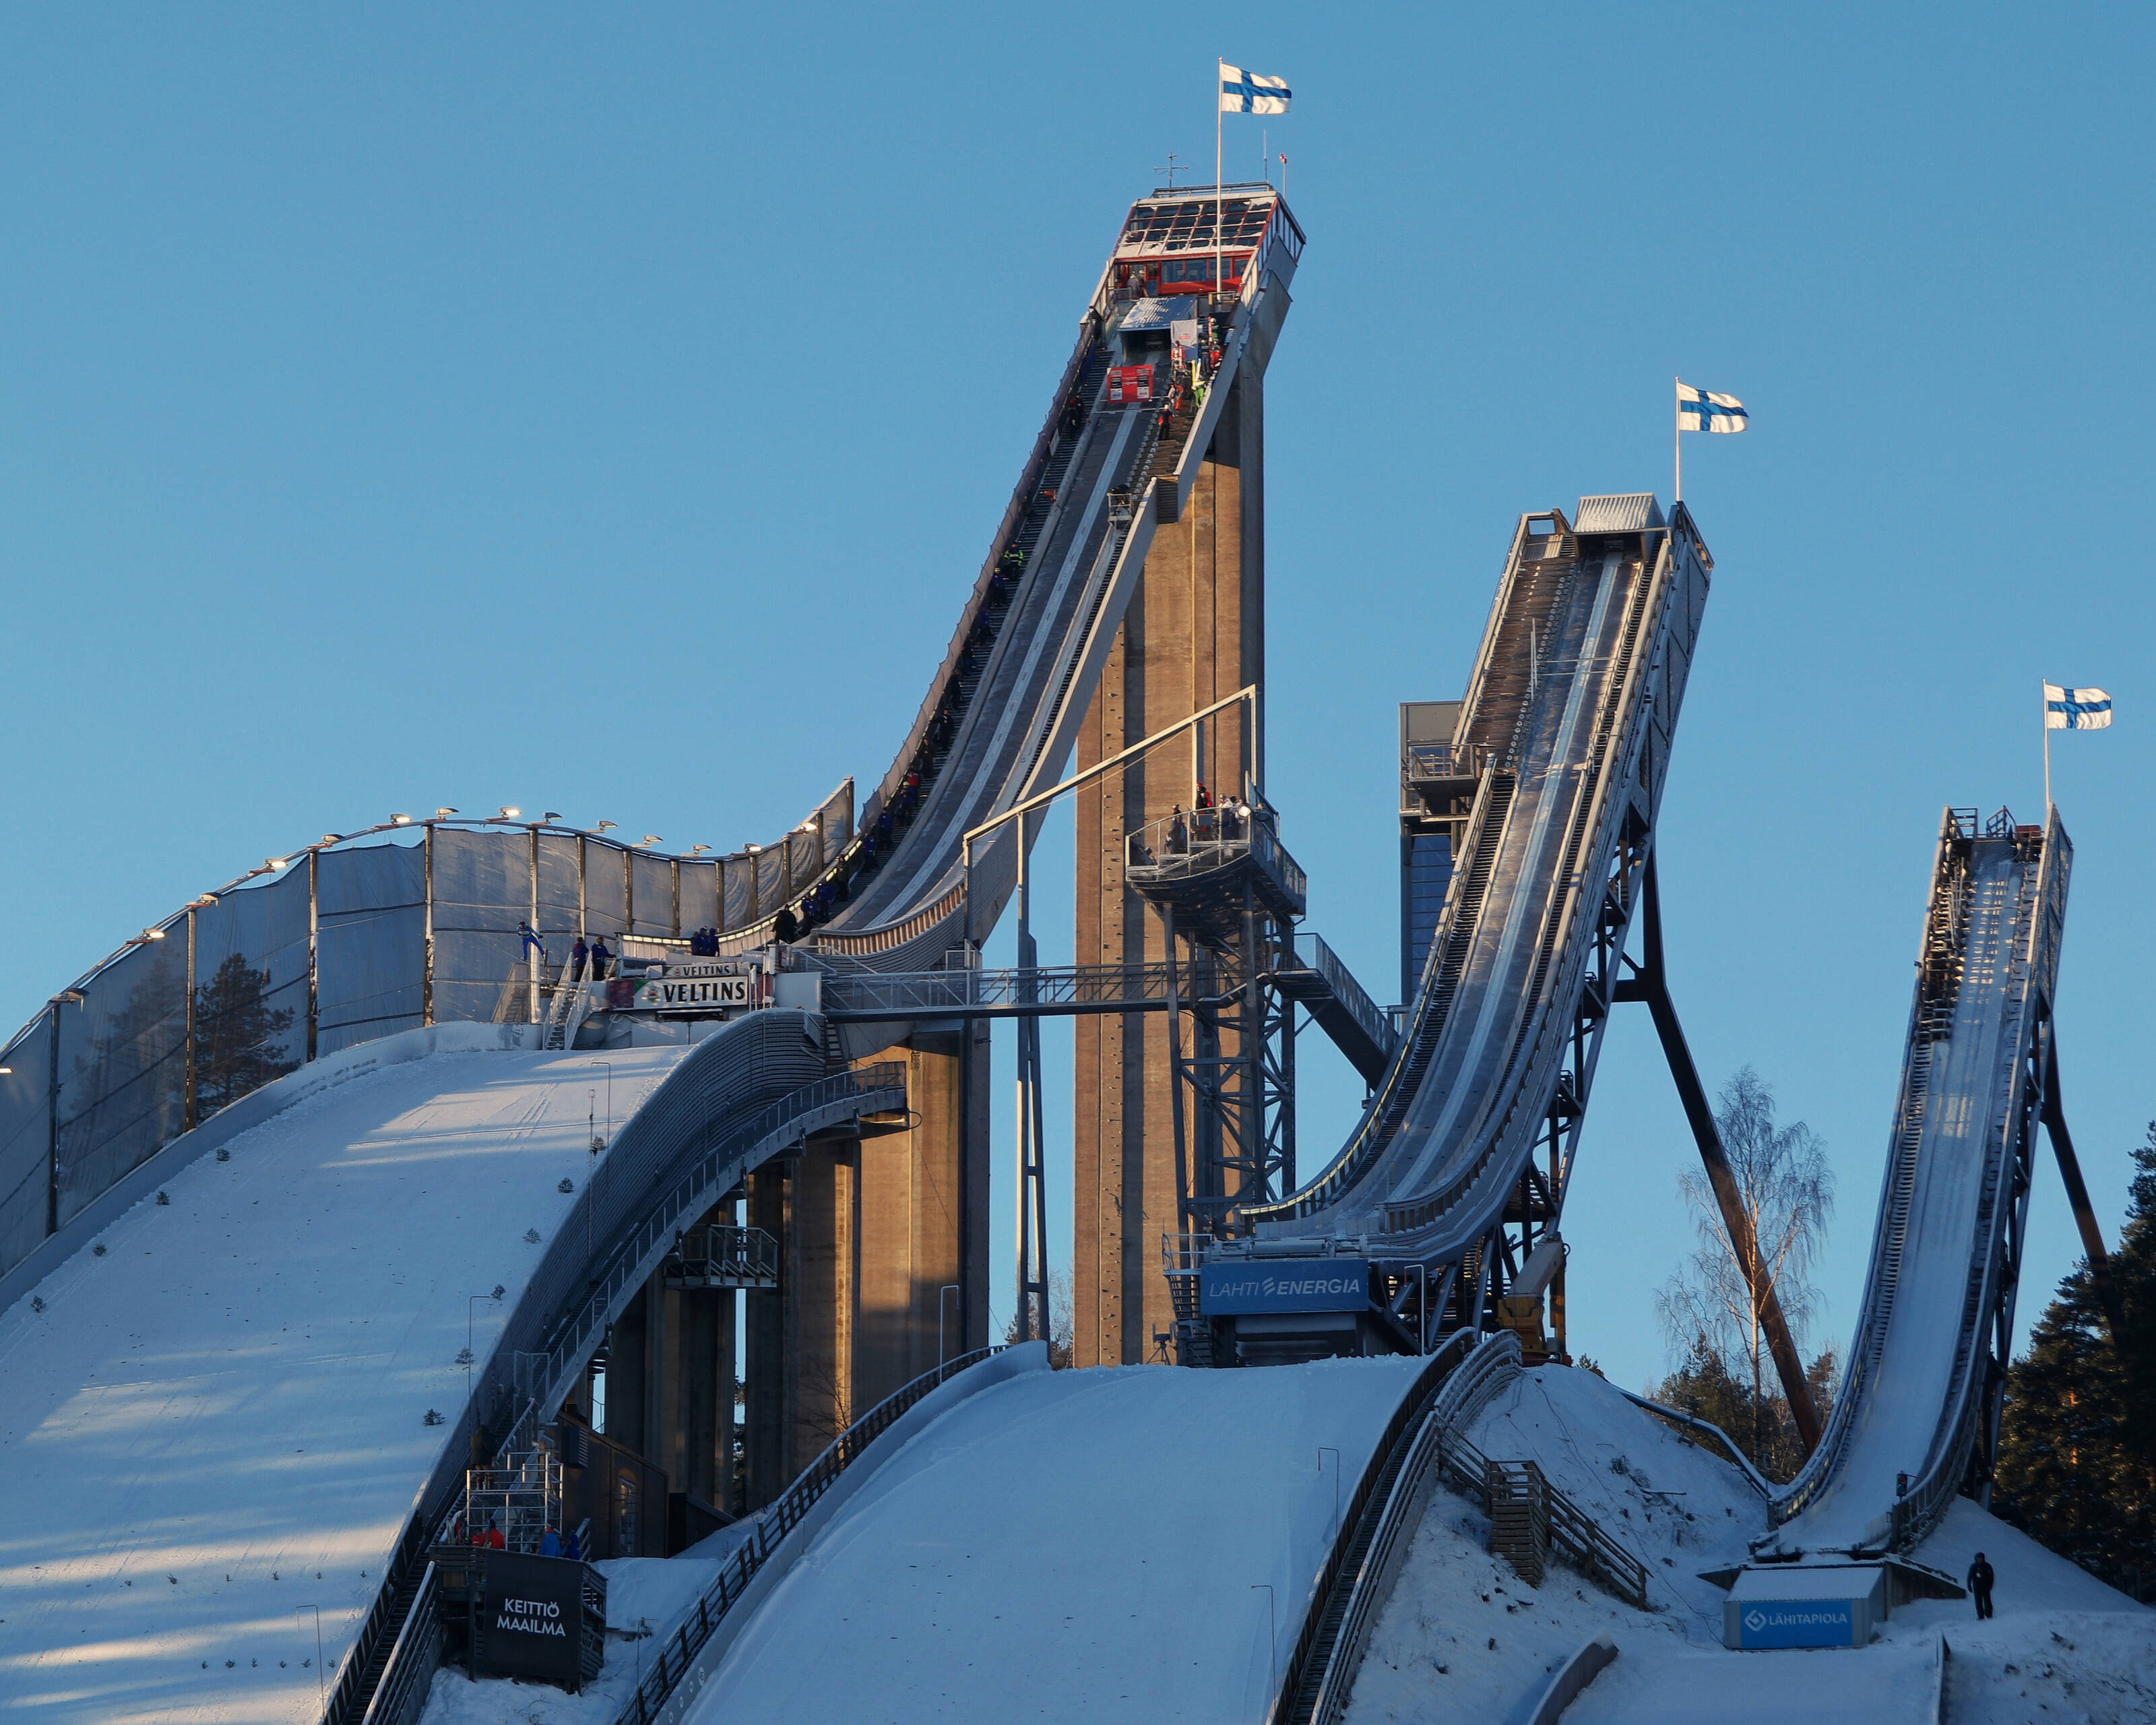 Three snow-covered ski jumping towers standing in a row.